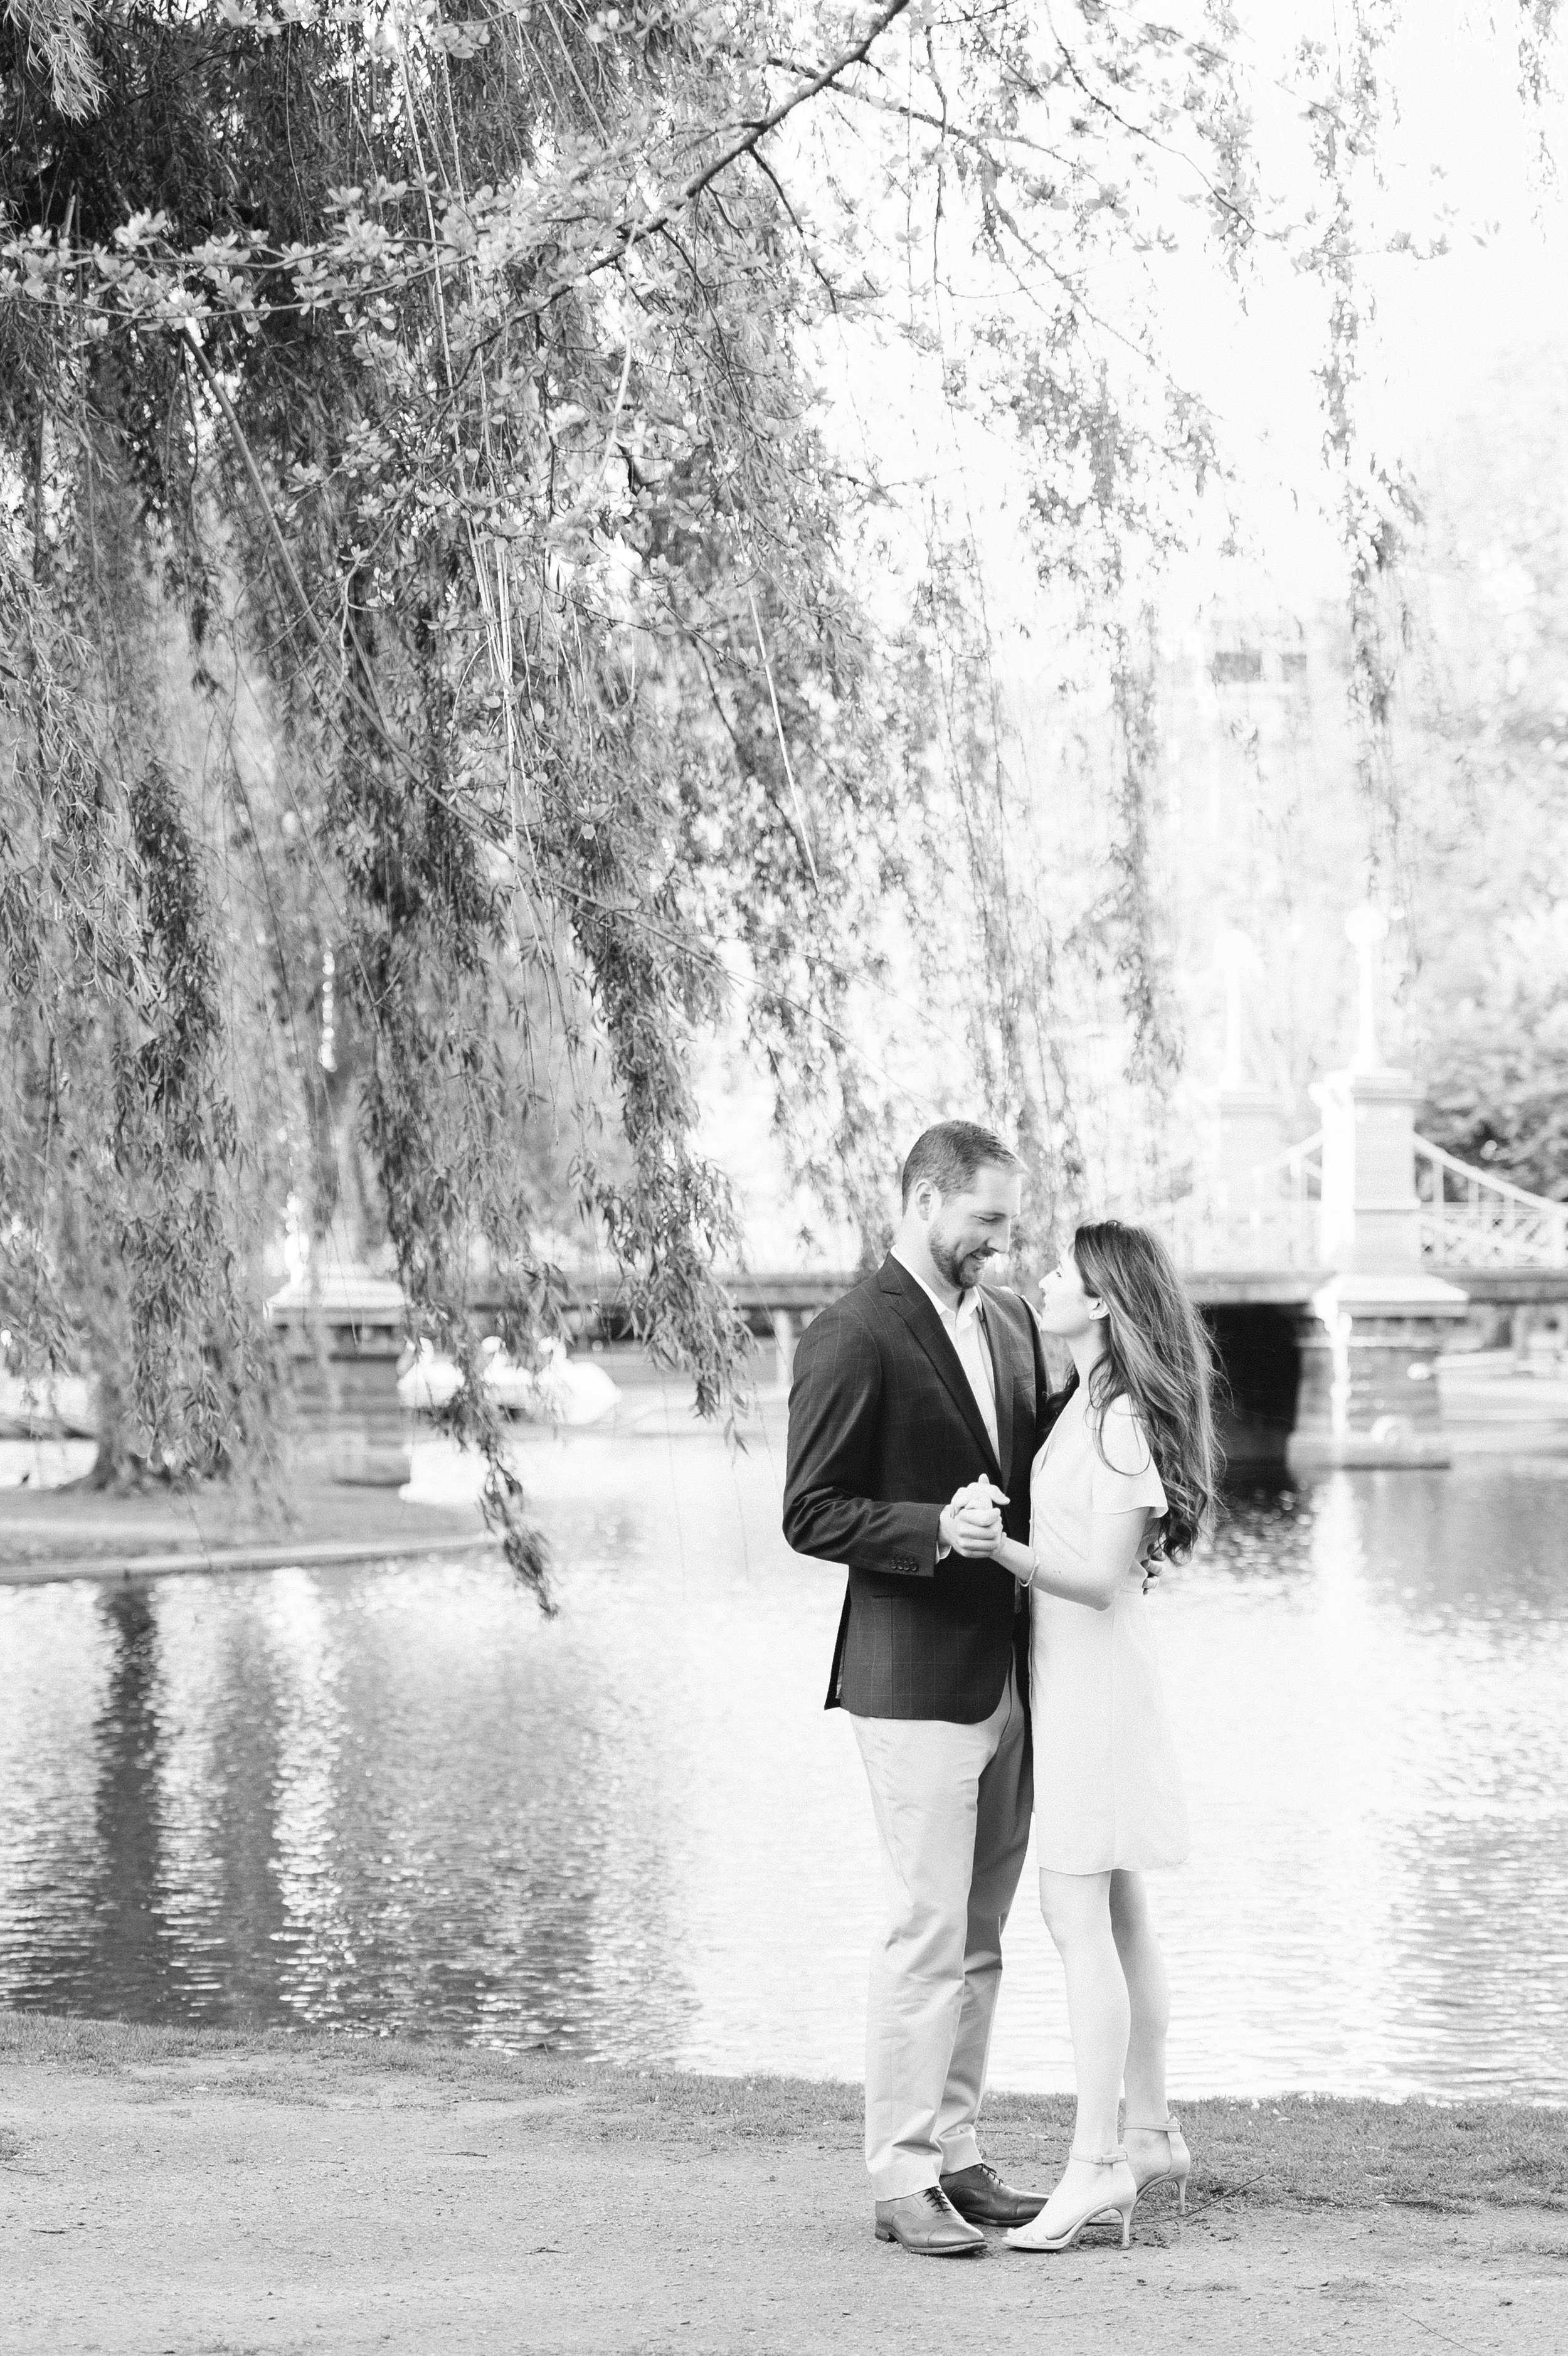 Engagement session at sunrise in Boston at the Public Garden in Black and White Classic Engagement photos